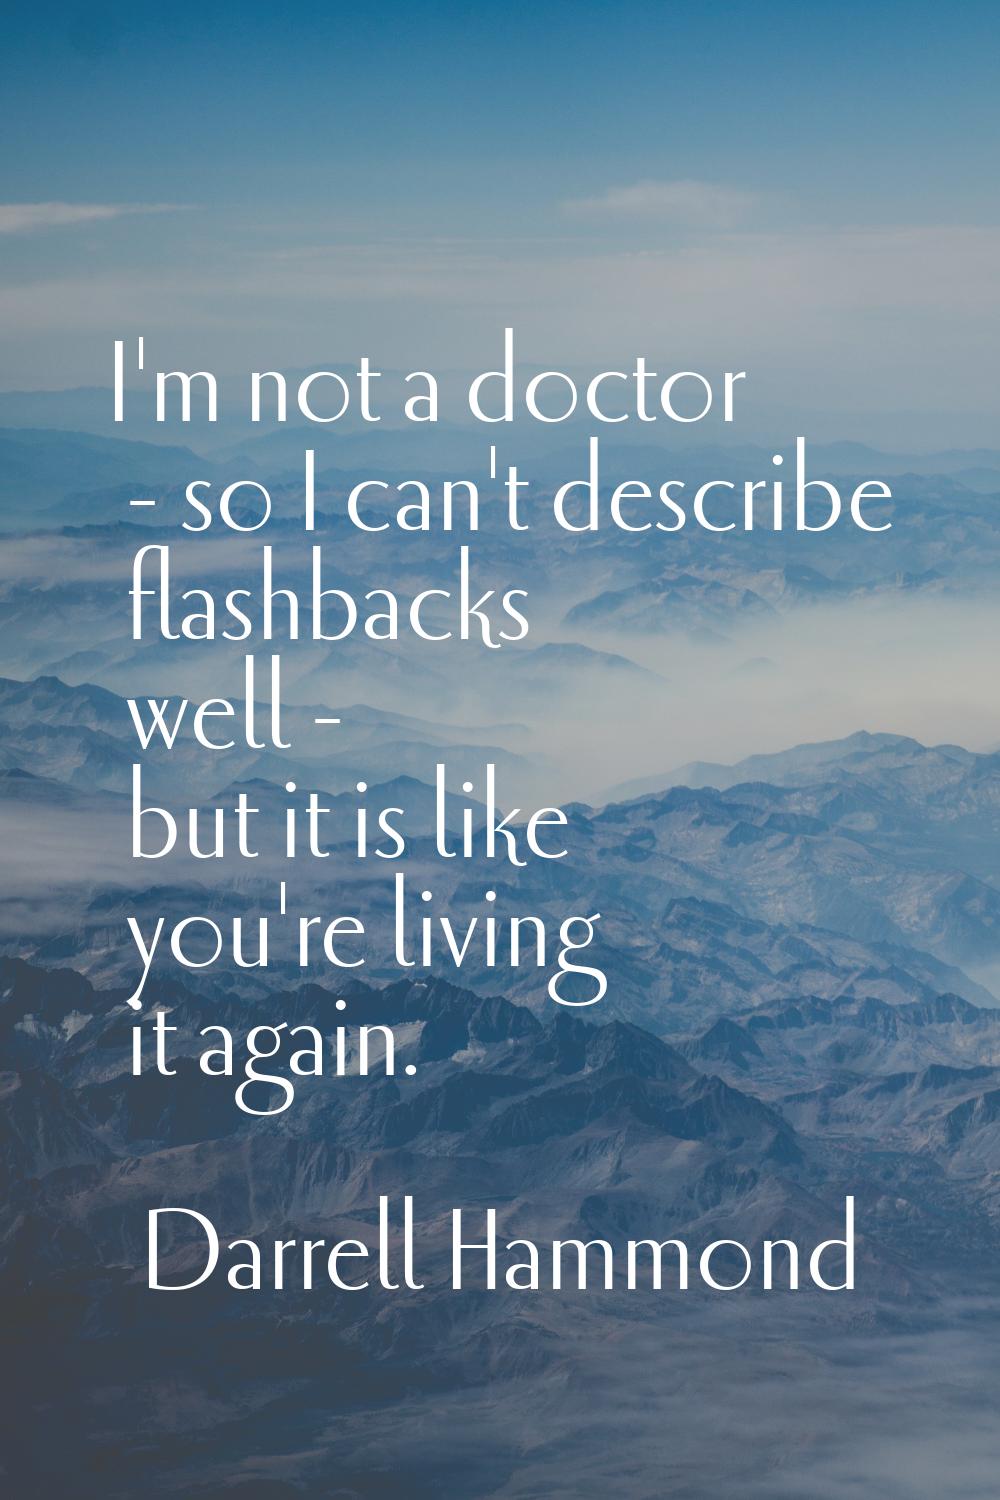 I'm not a doctor - so I can't describe flashbacks well - but it is like you're living it again.